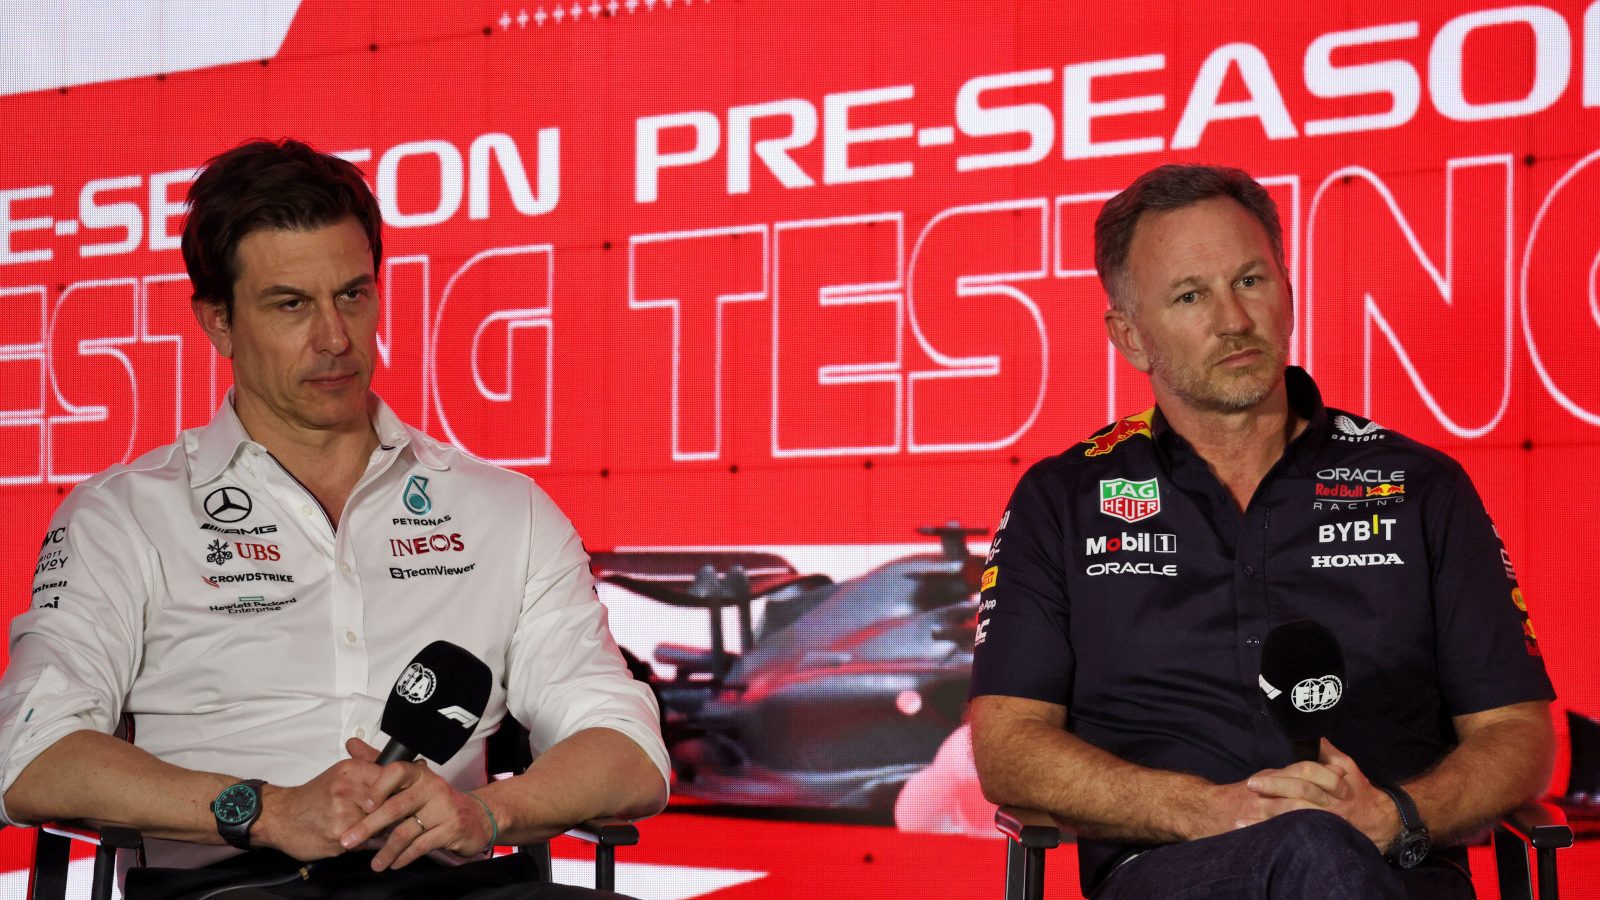 Toto Wolff and Christian Horner looking glum in the pre-season press conference. Bahrain February 2023